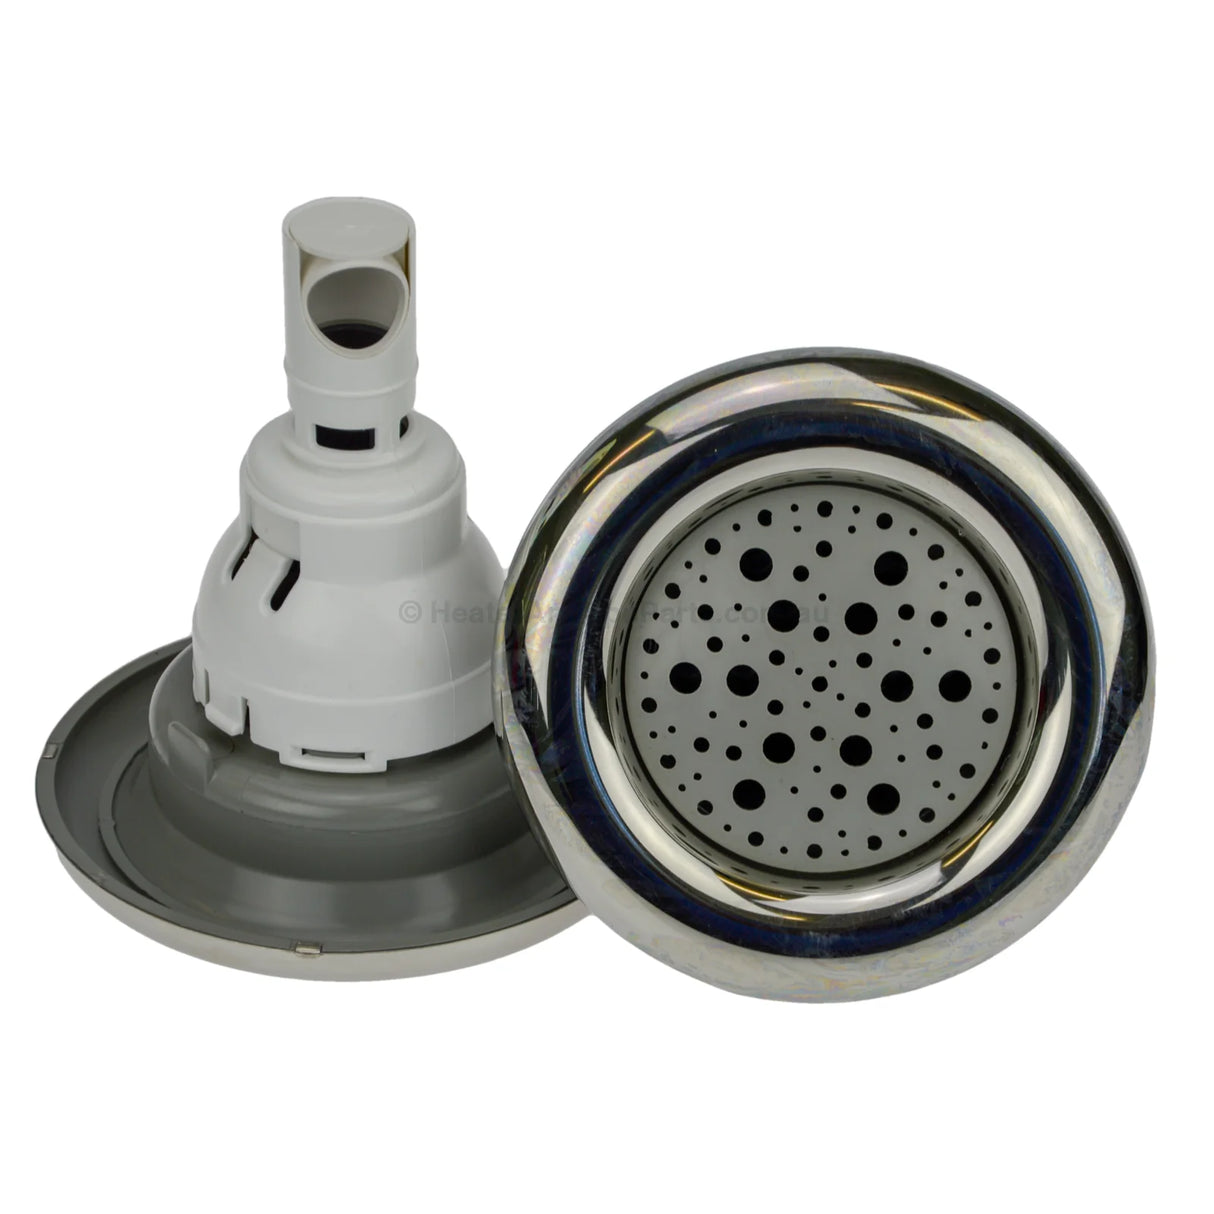 Obsolete - Waterway Power Storm - Galaxy Massage - Stainless Steel - 125mm 5" - Heater and Spa Parts